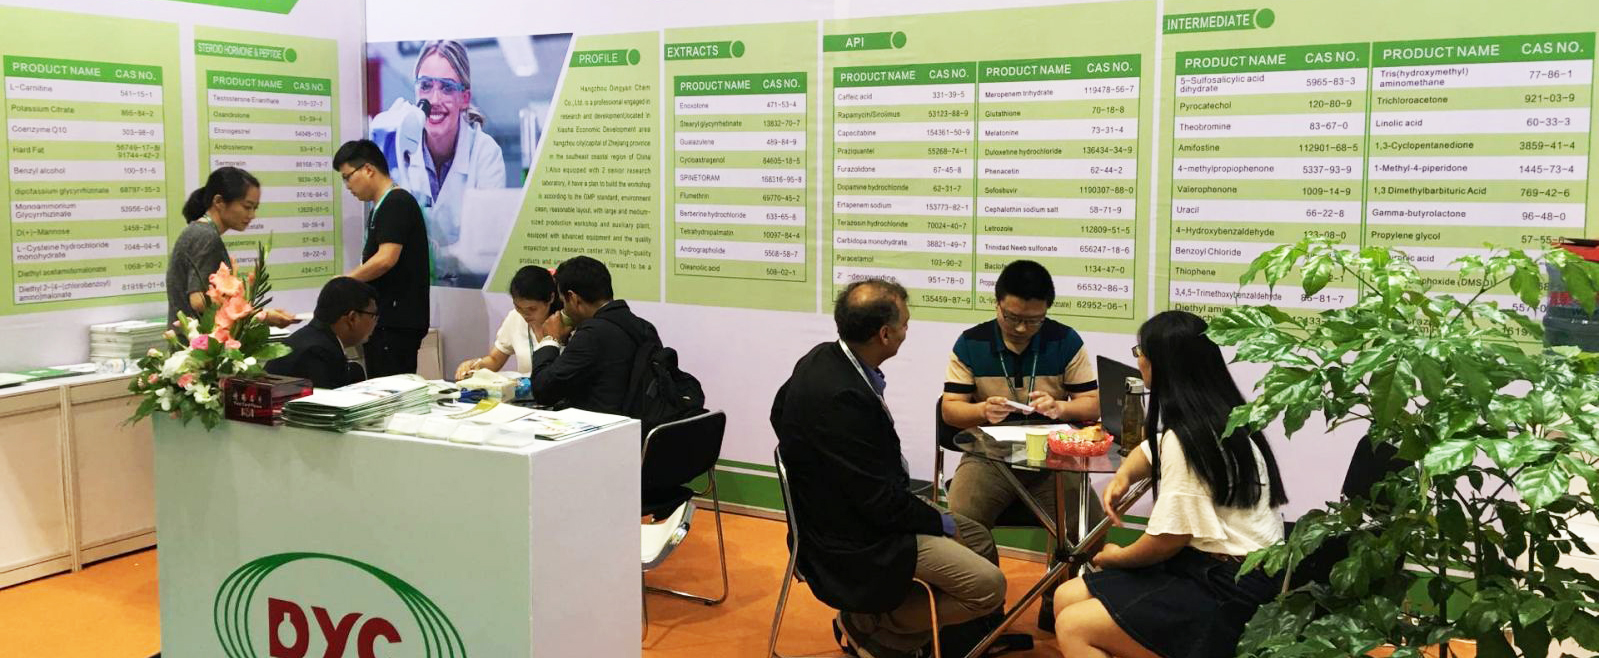 We participated in the CPHI for many years. And actively participate in various exhibitions to promote their products,form which i know a lot of customers.